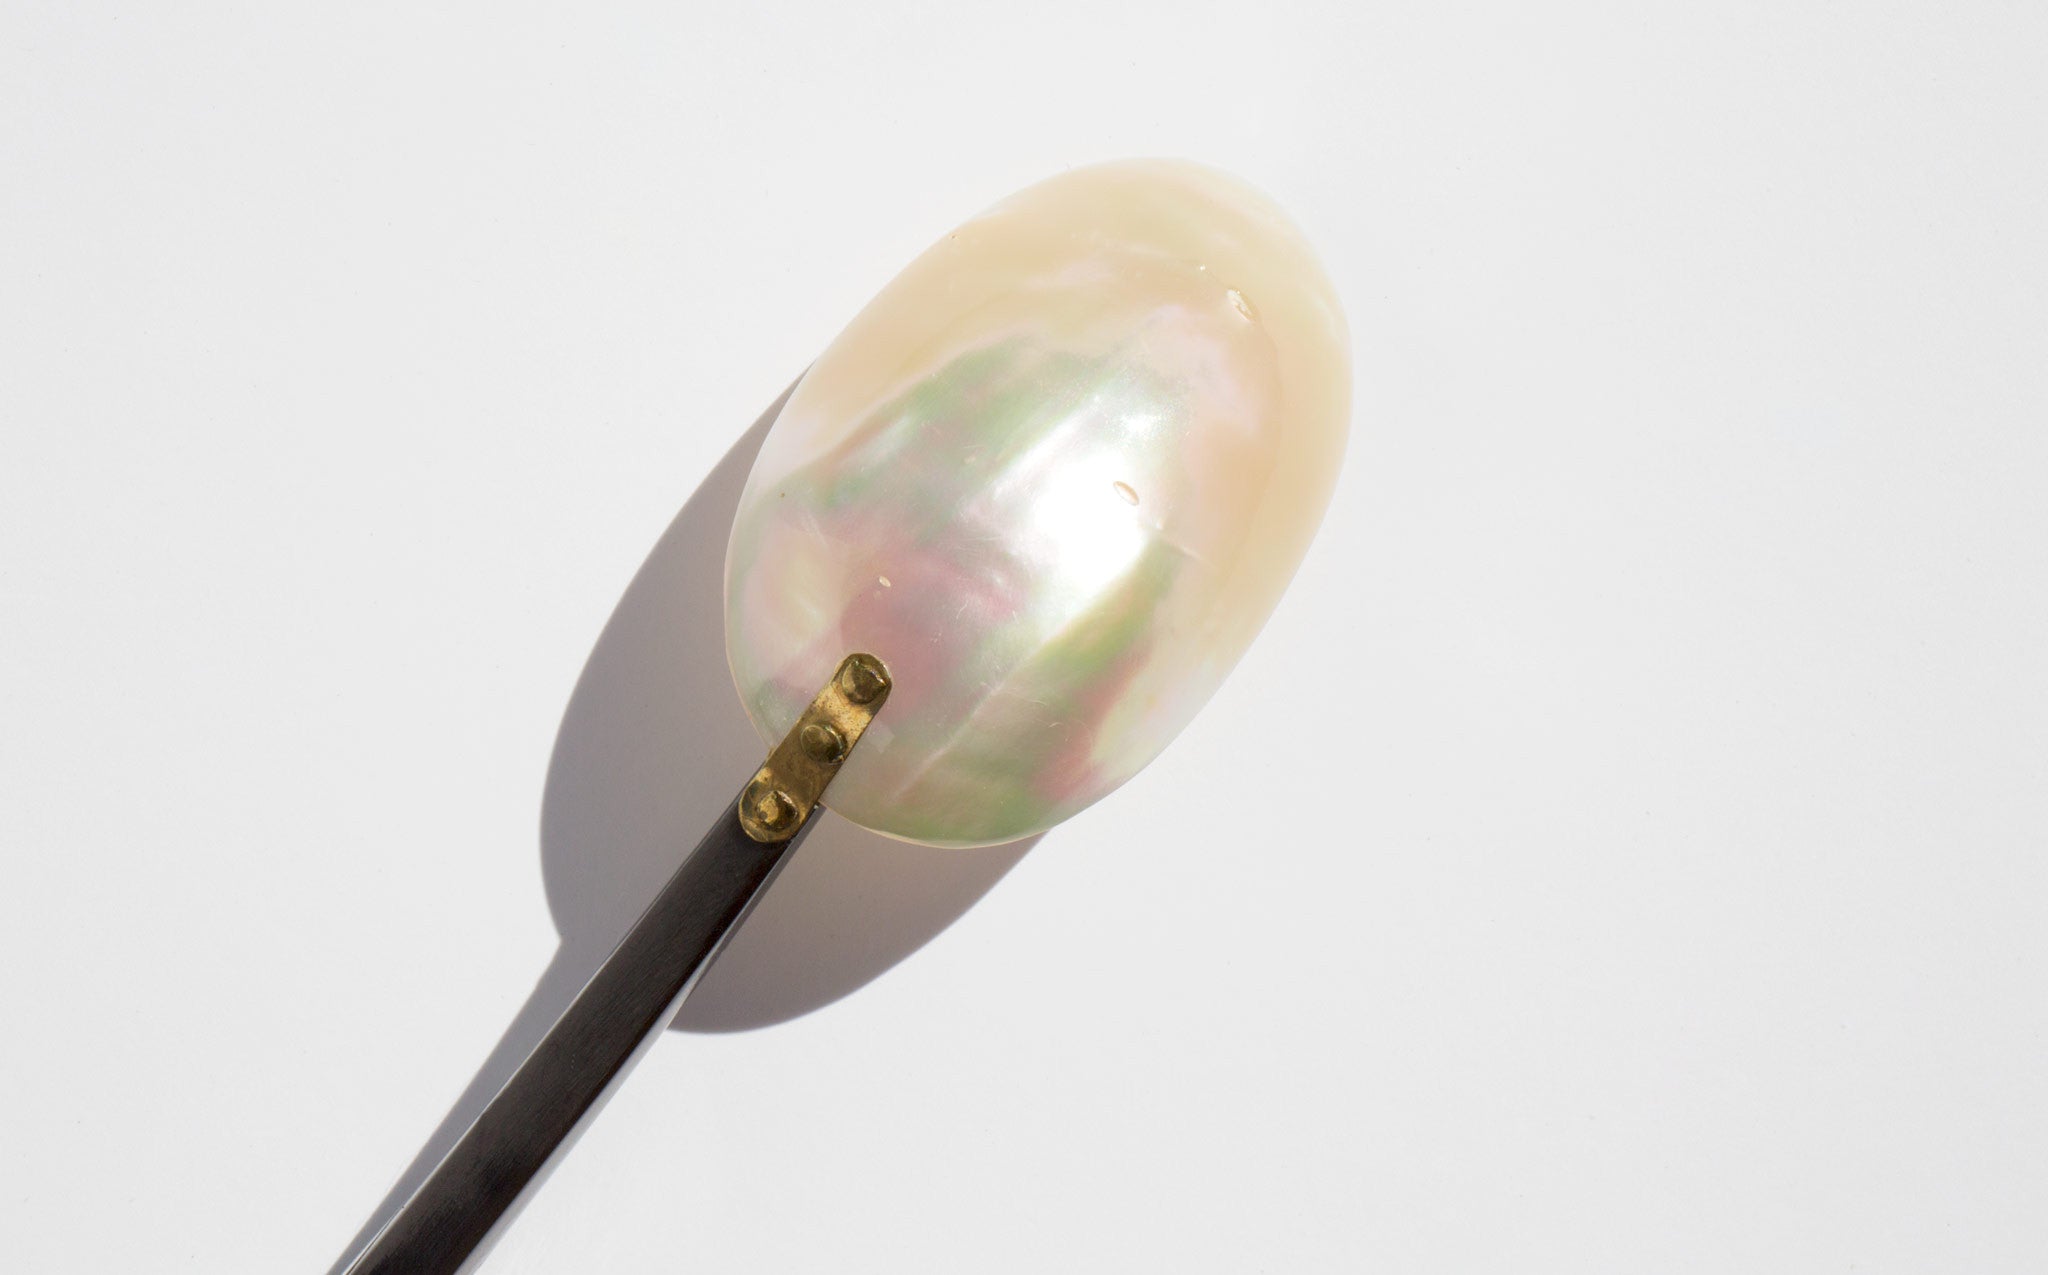 Ebony and Mother of Pearl Caviar Spoon